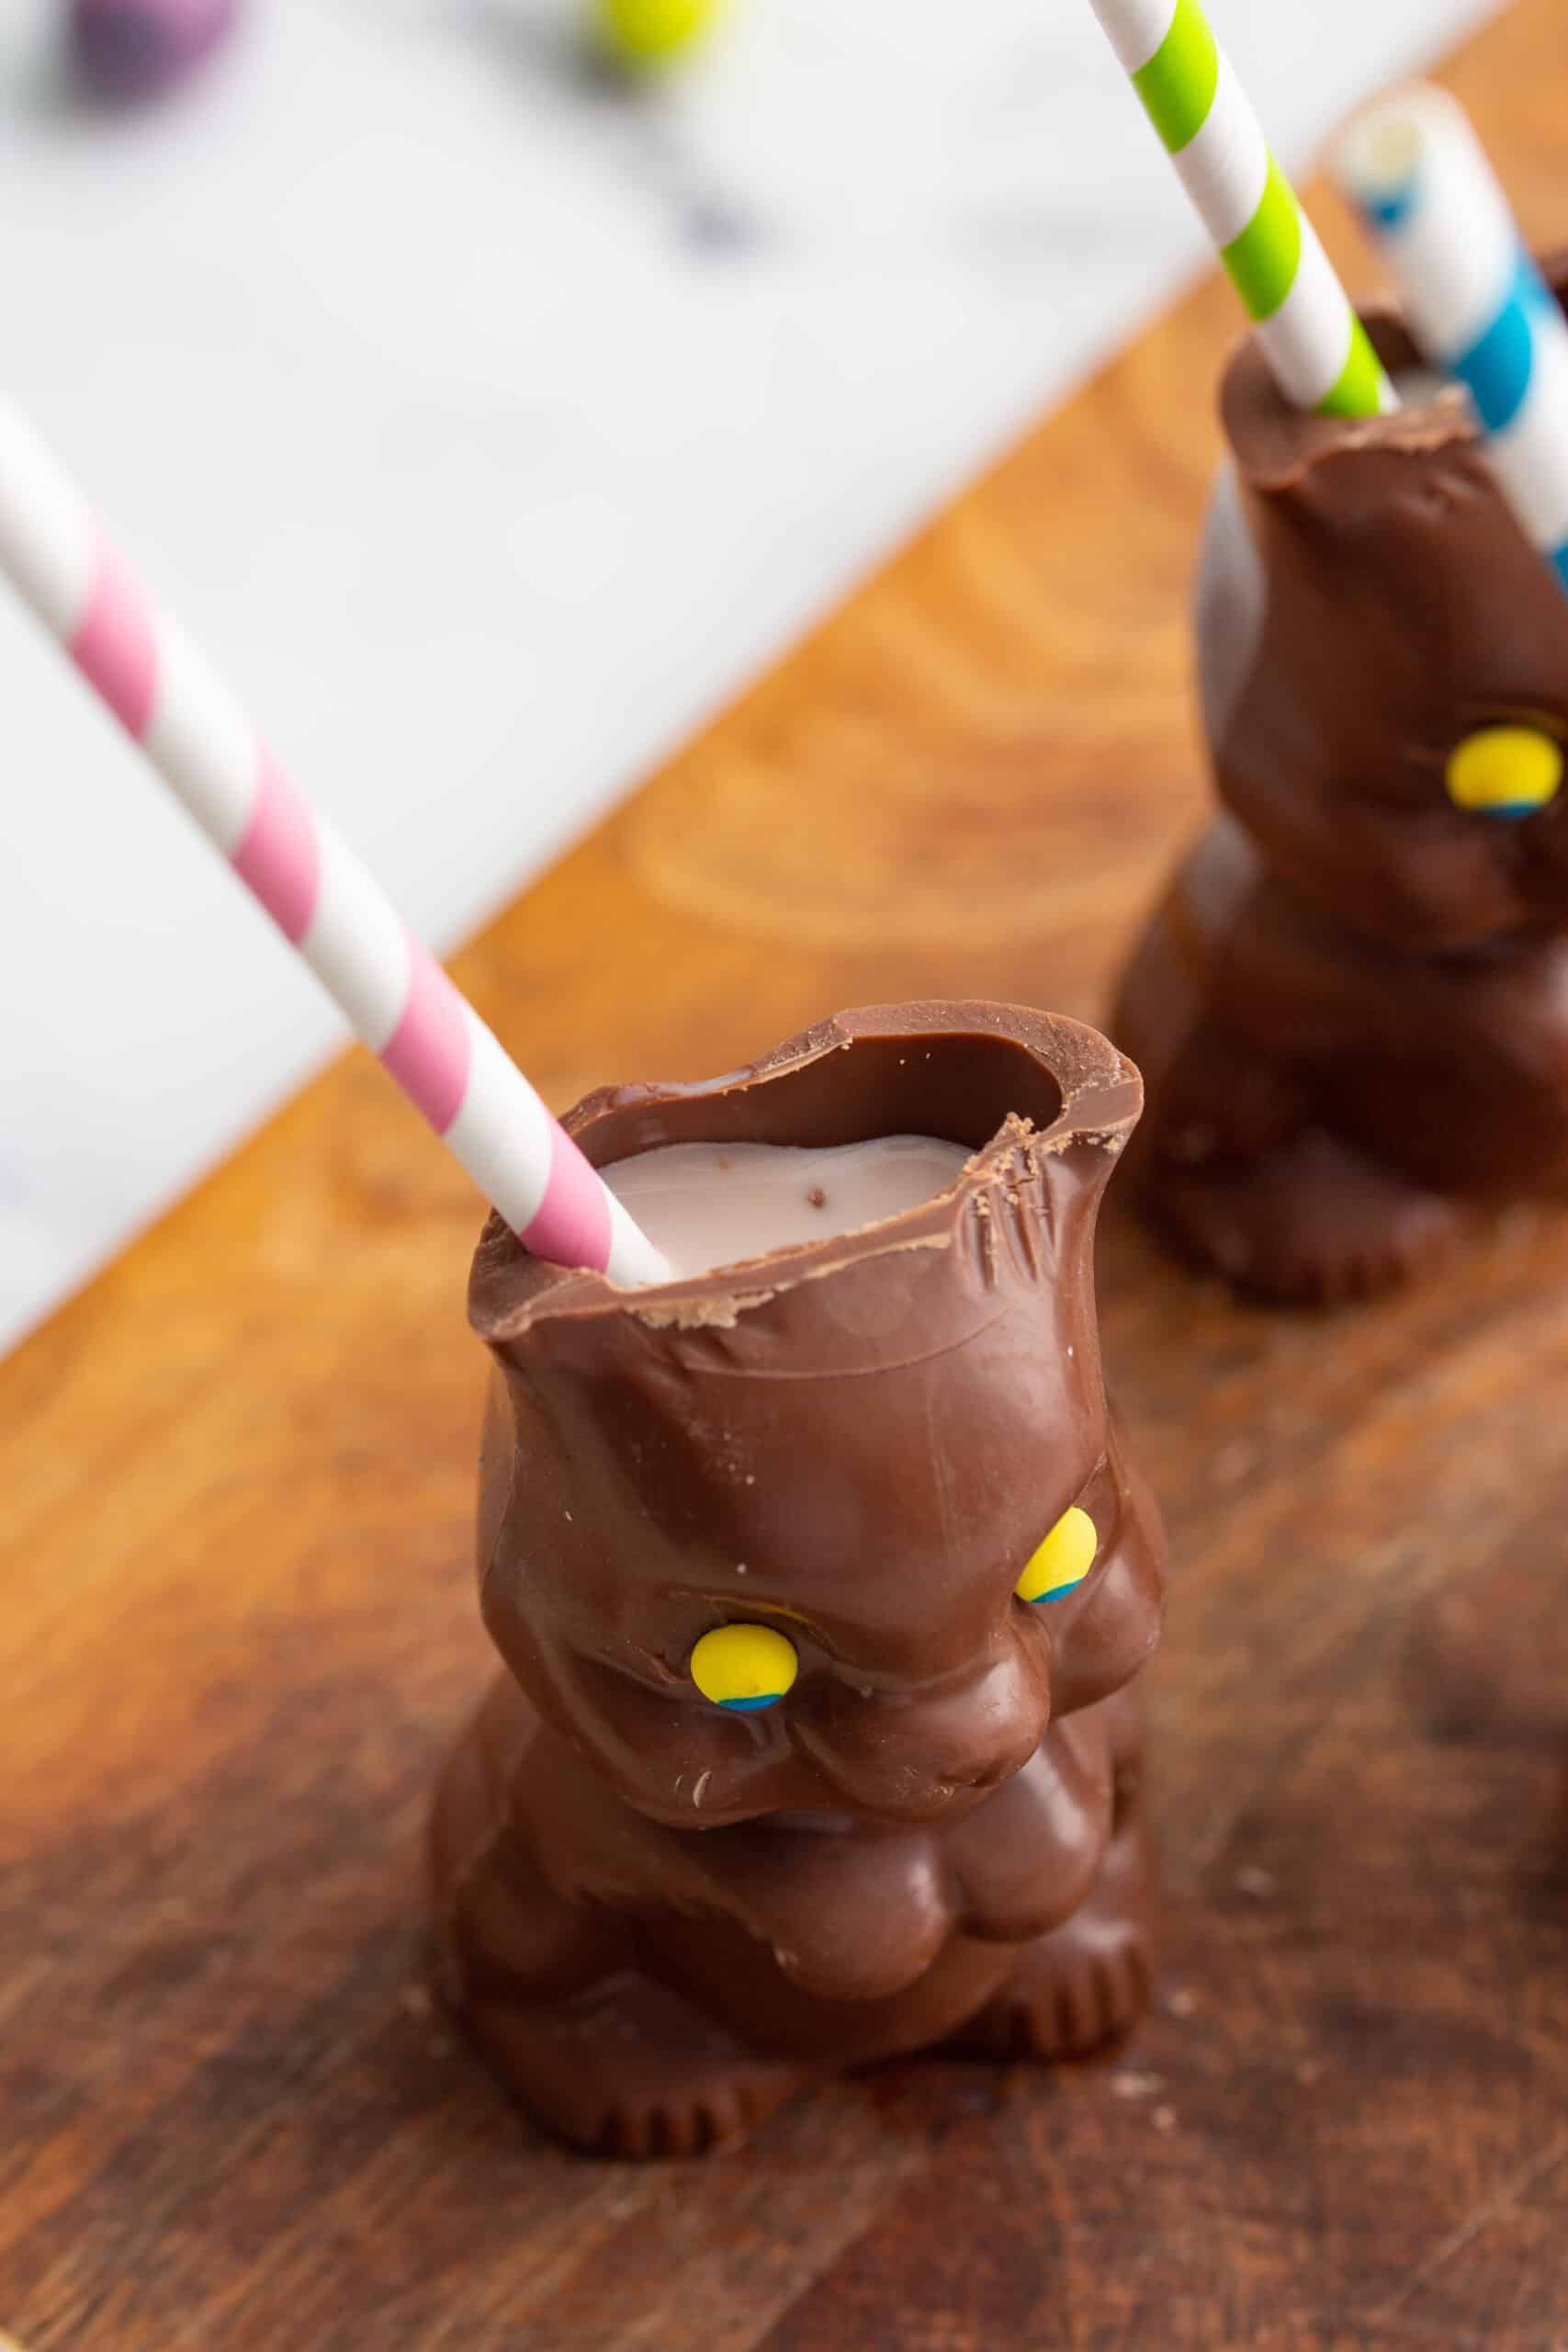 What To Do with Chocolate Bunnies: Chocolate Bunny Cups (great for a chocolate bunny cocktail)